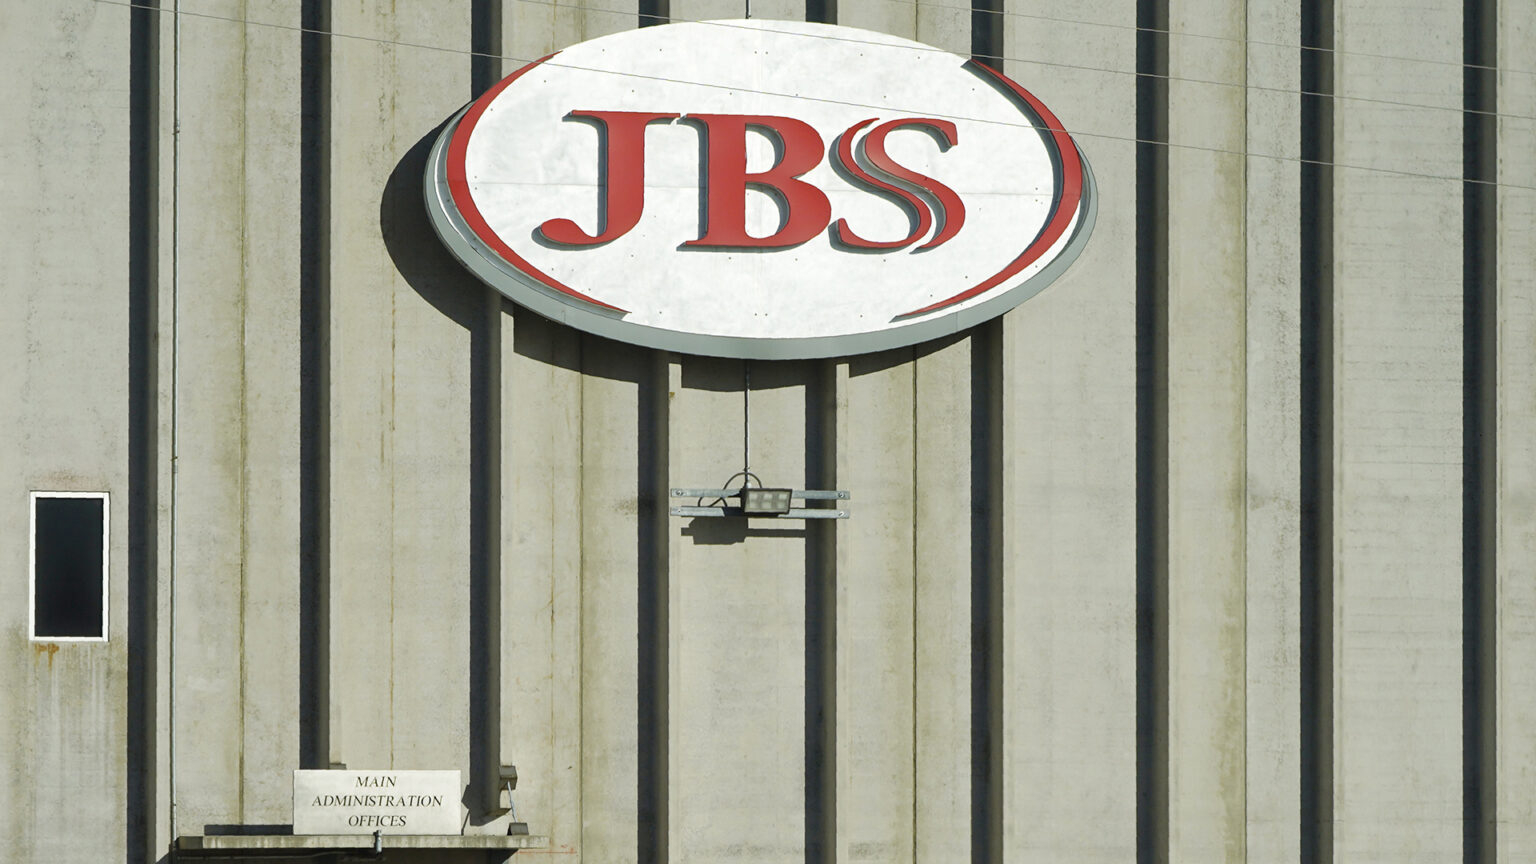 A sign with a wordmark logo that reads JBS is fixed to the wall of a multi-story building with concrete and metal walls, with a sign atop a door reading Main Administration Offices.